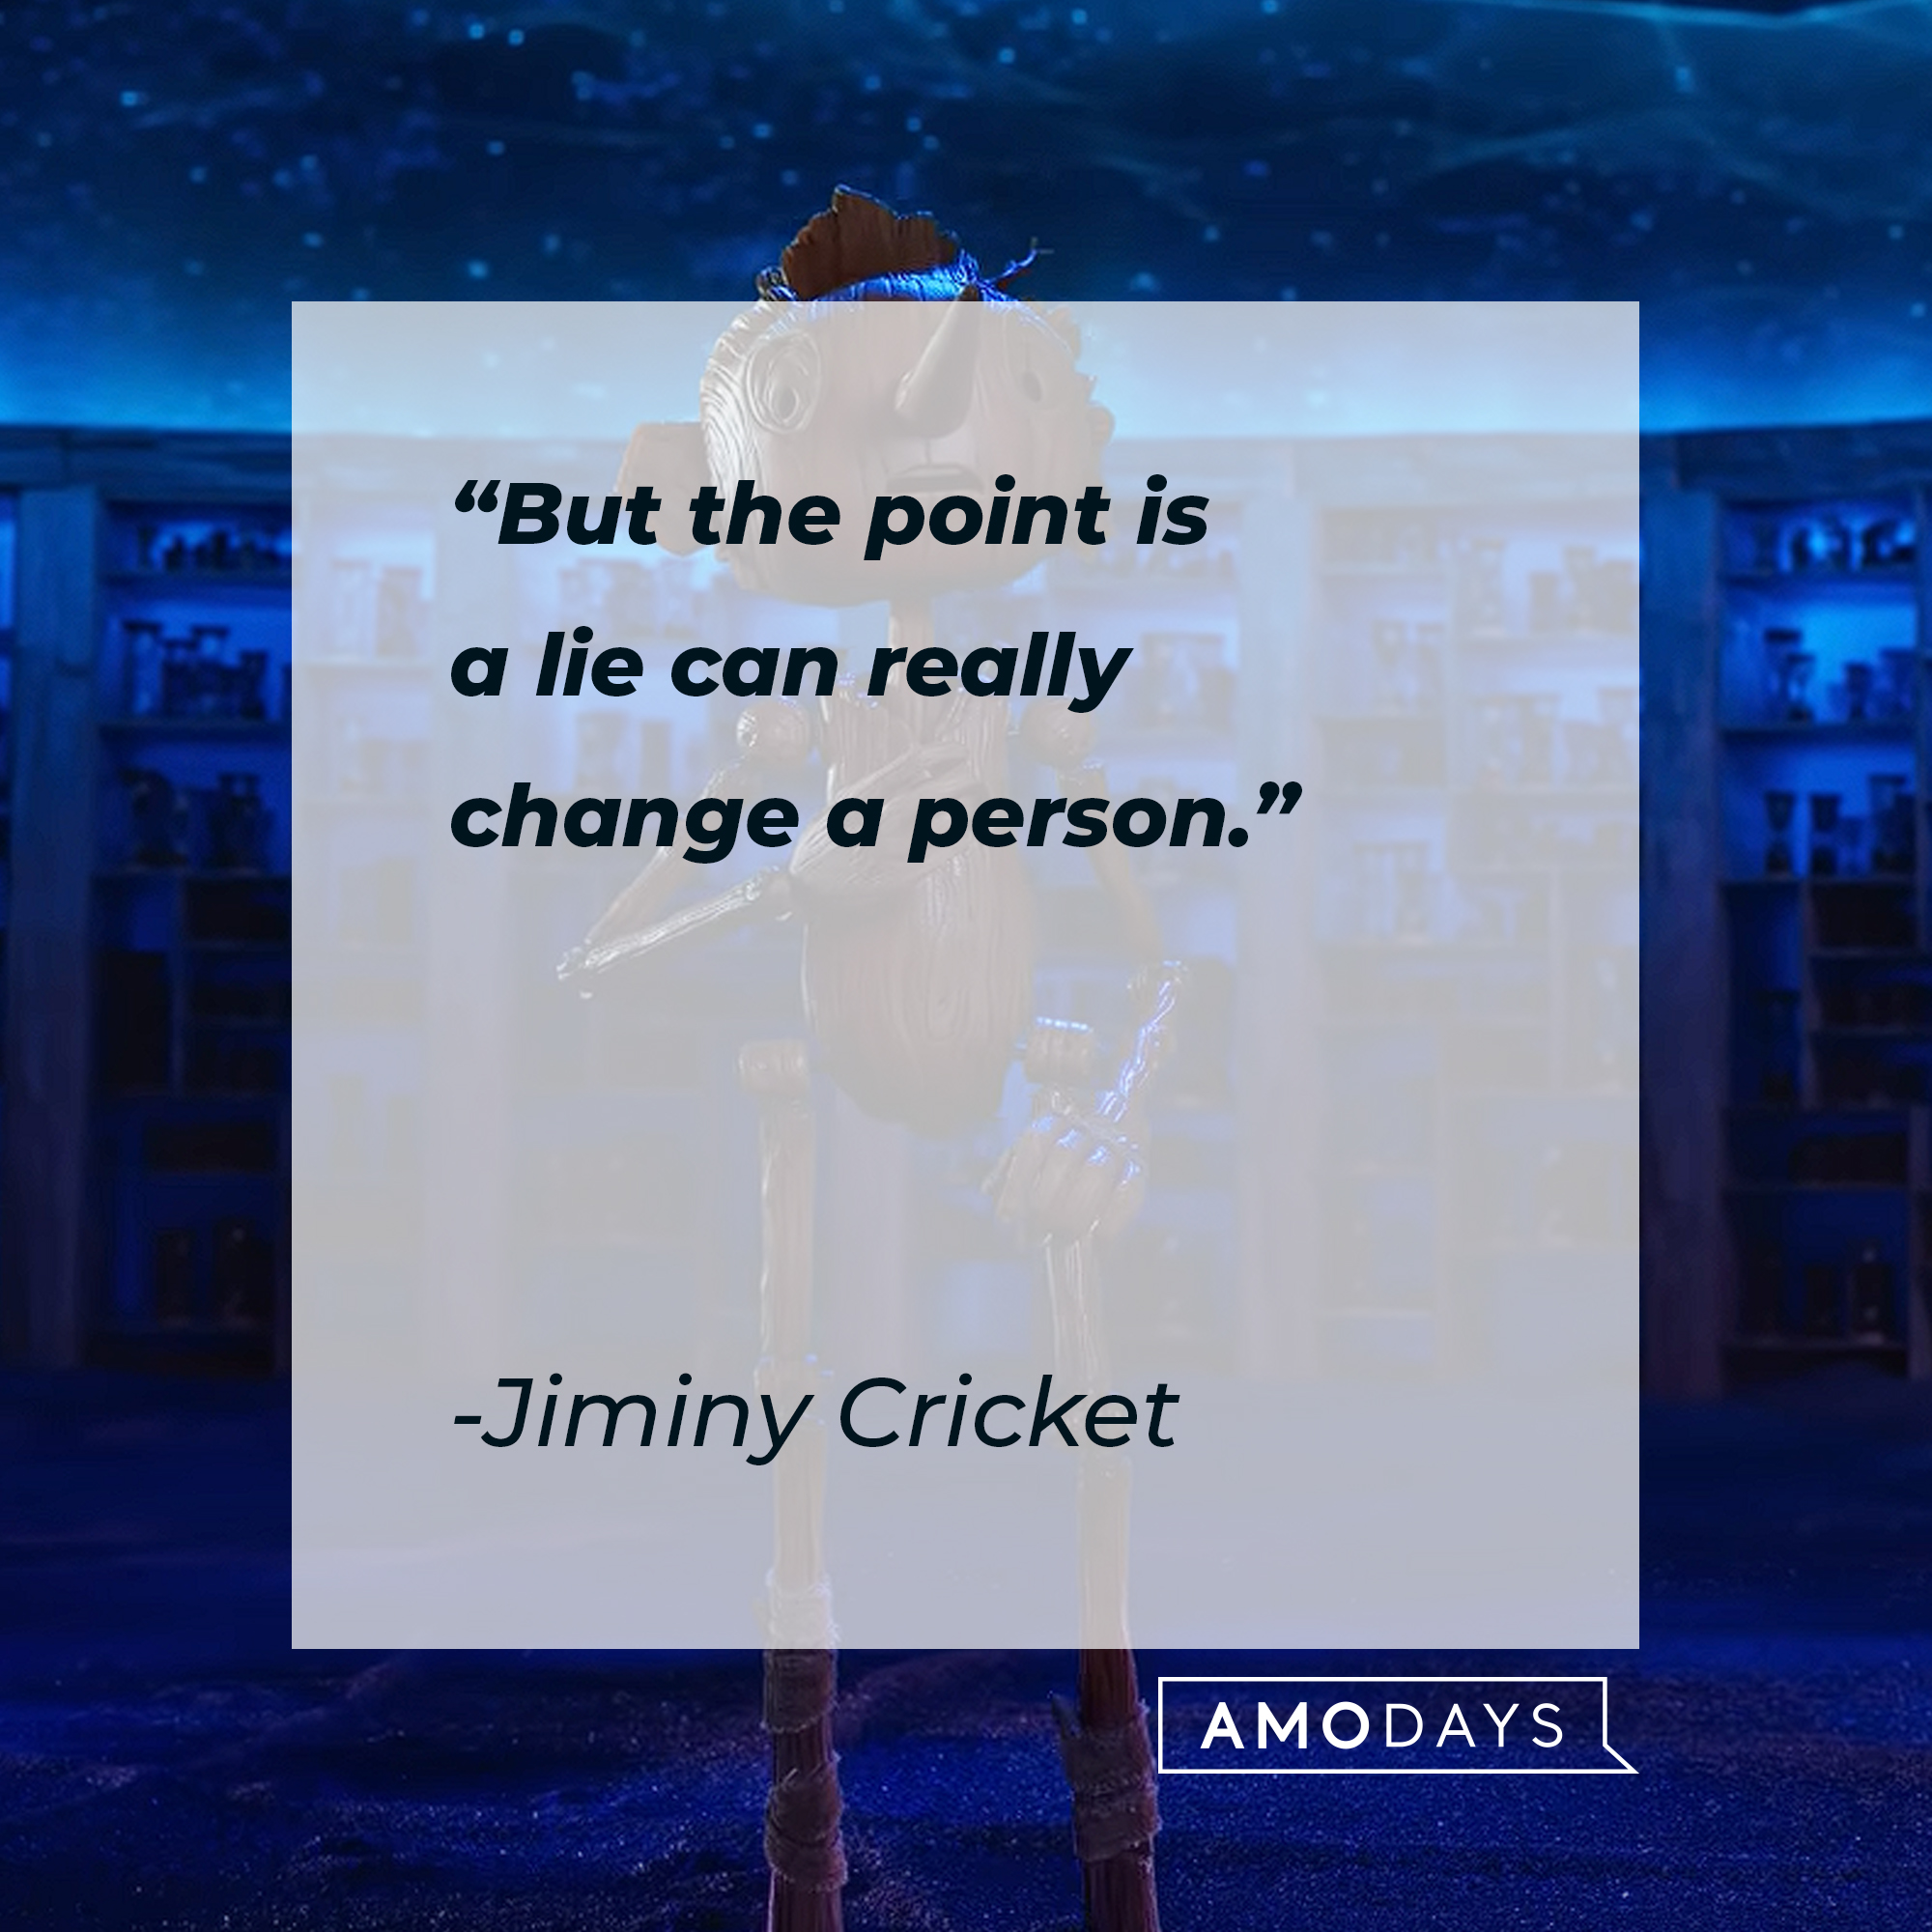 Jiminy Cricket's quote: "But the point is a lie can really change a person." | Image: AmoDays